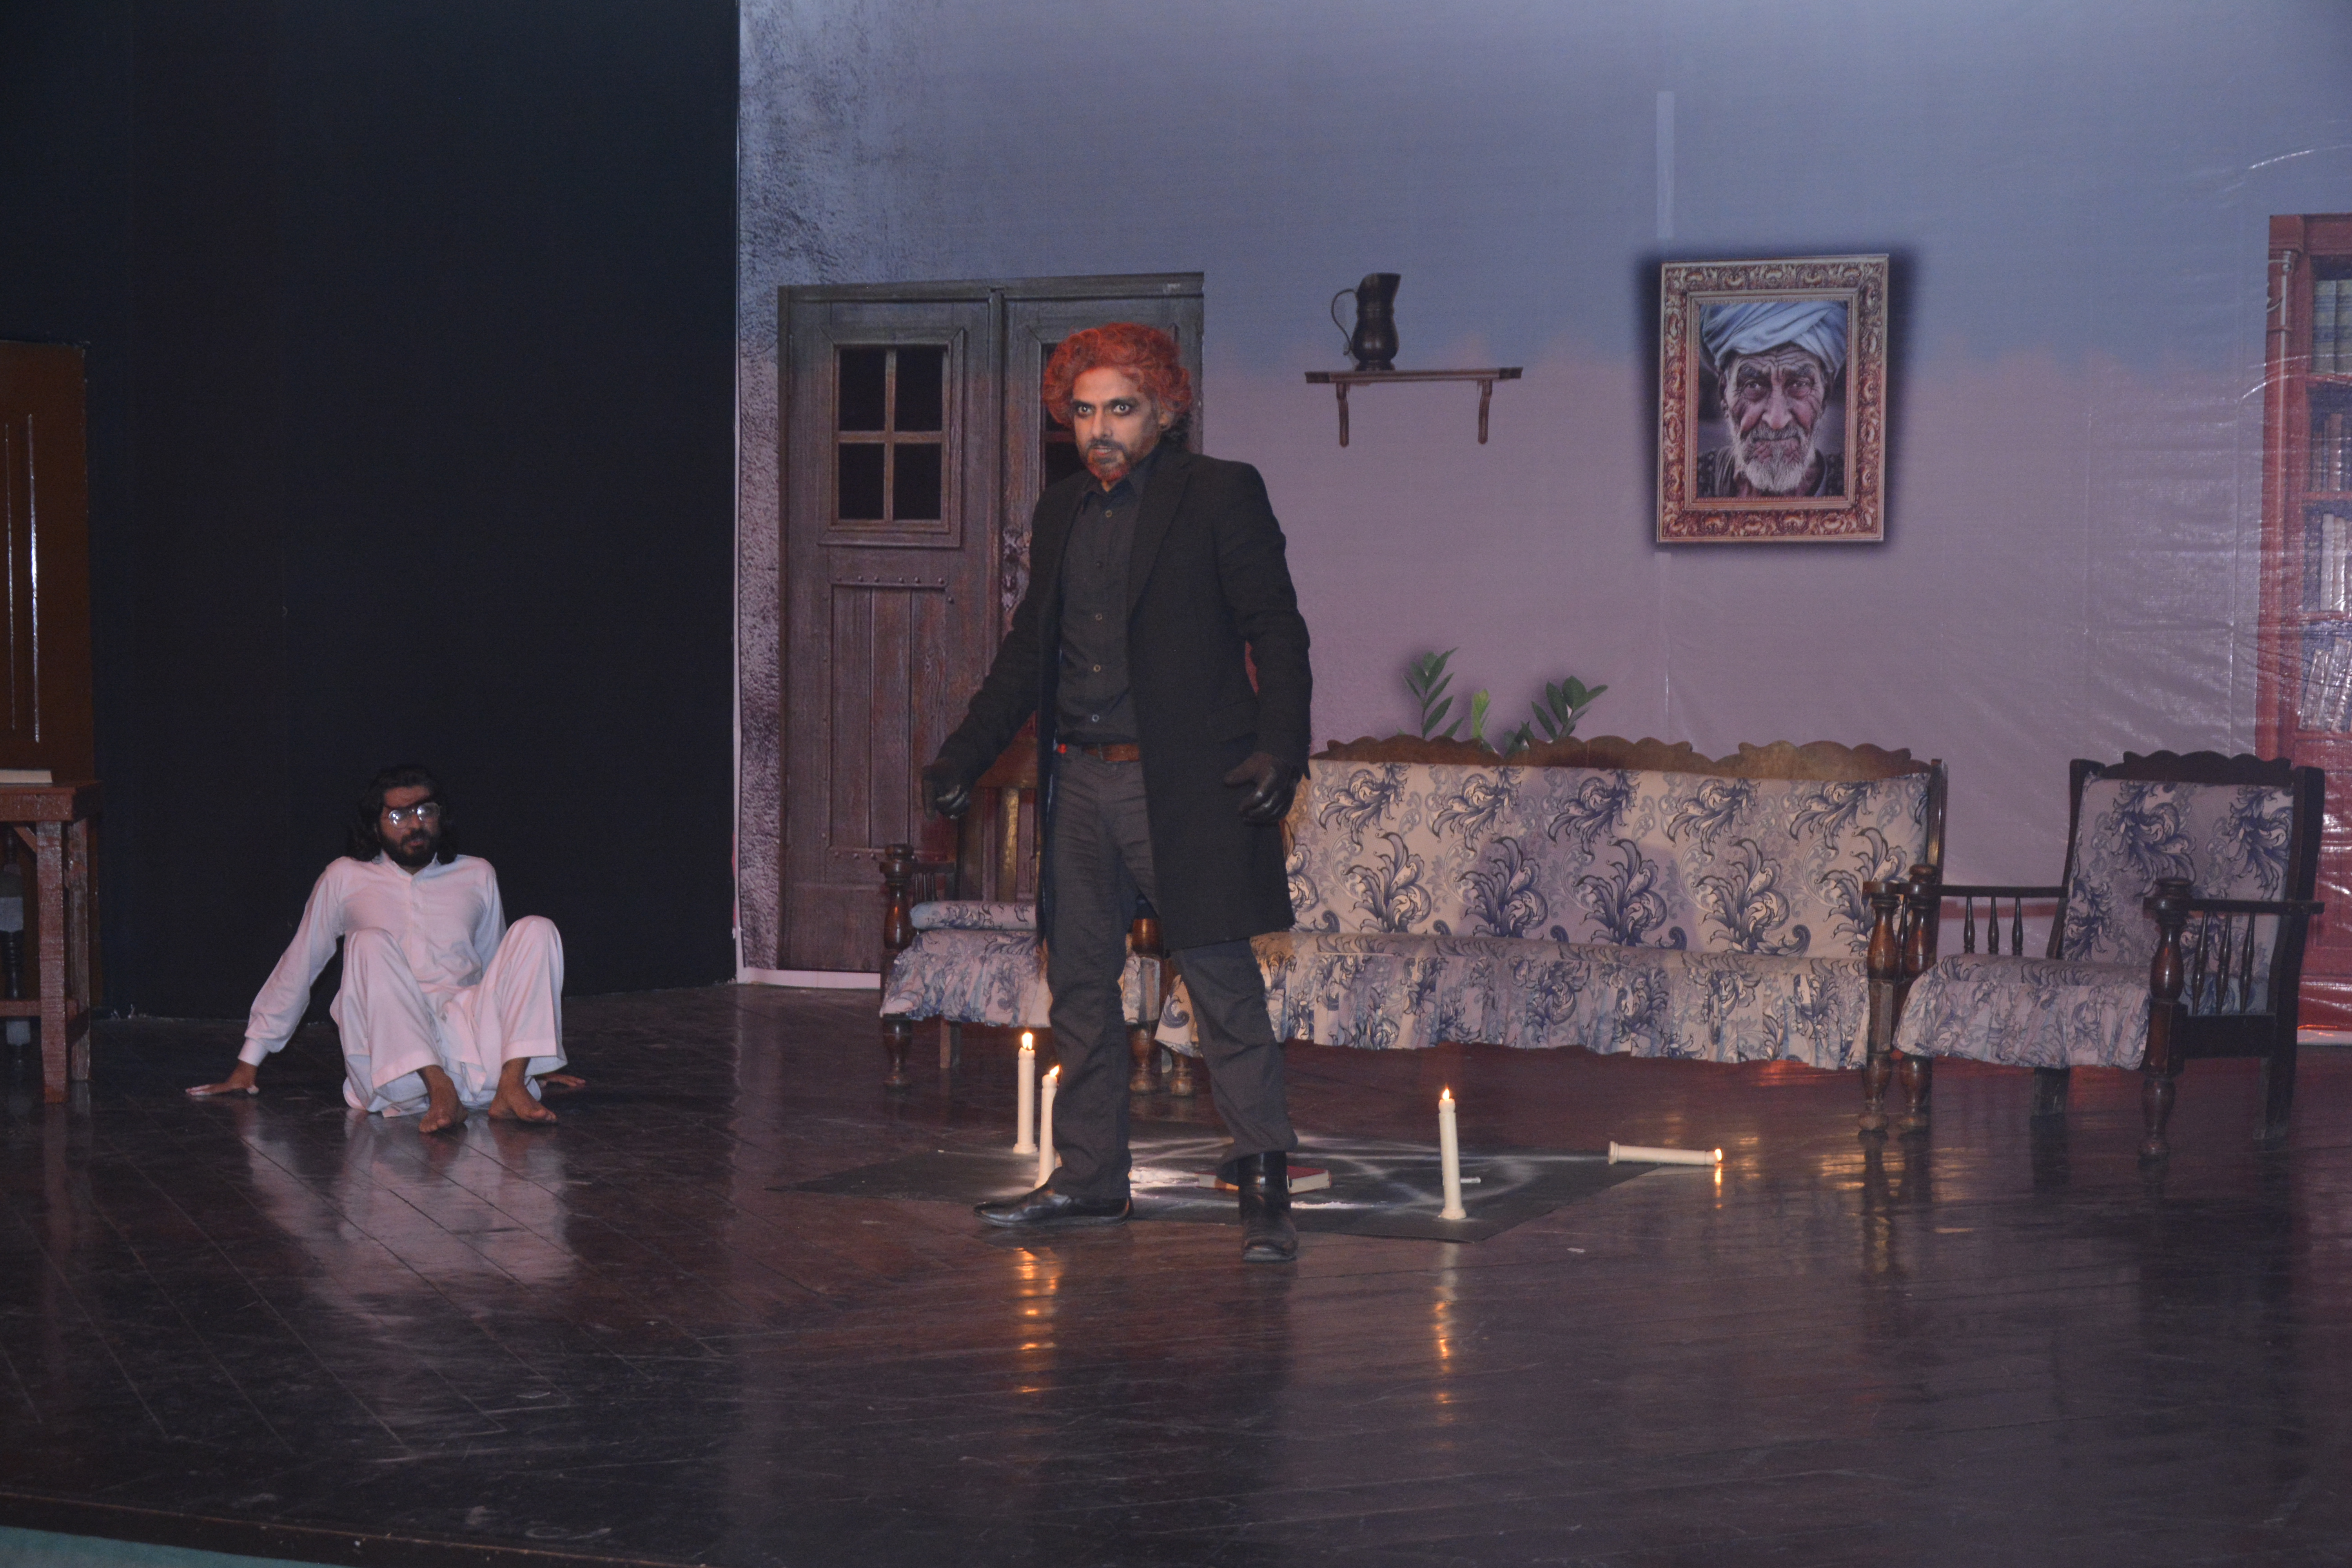 SMCS First Stage Play ‘Gummrah’ Reflects the Evils of Society